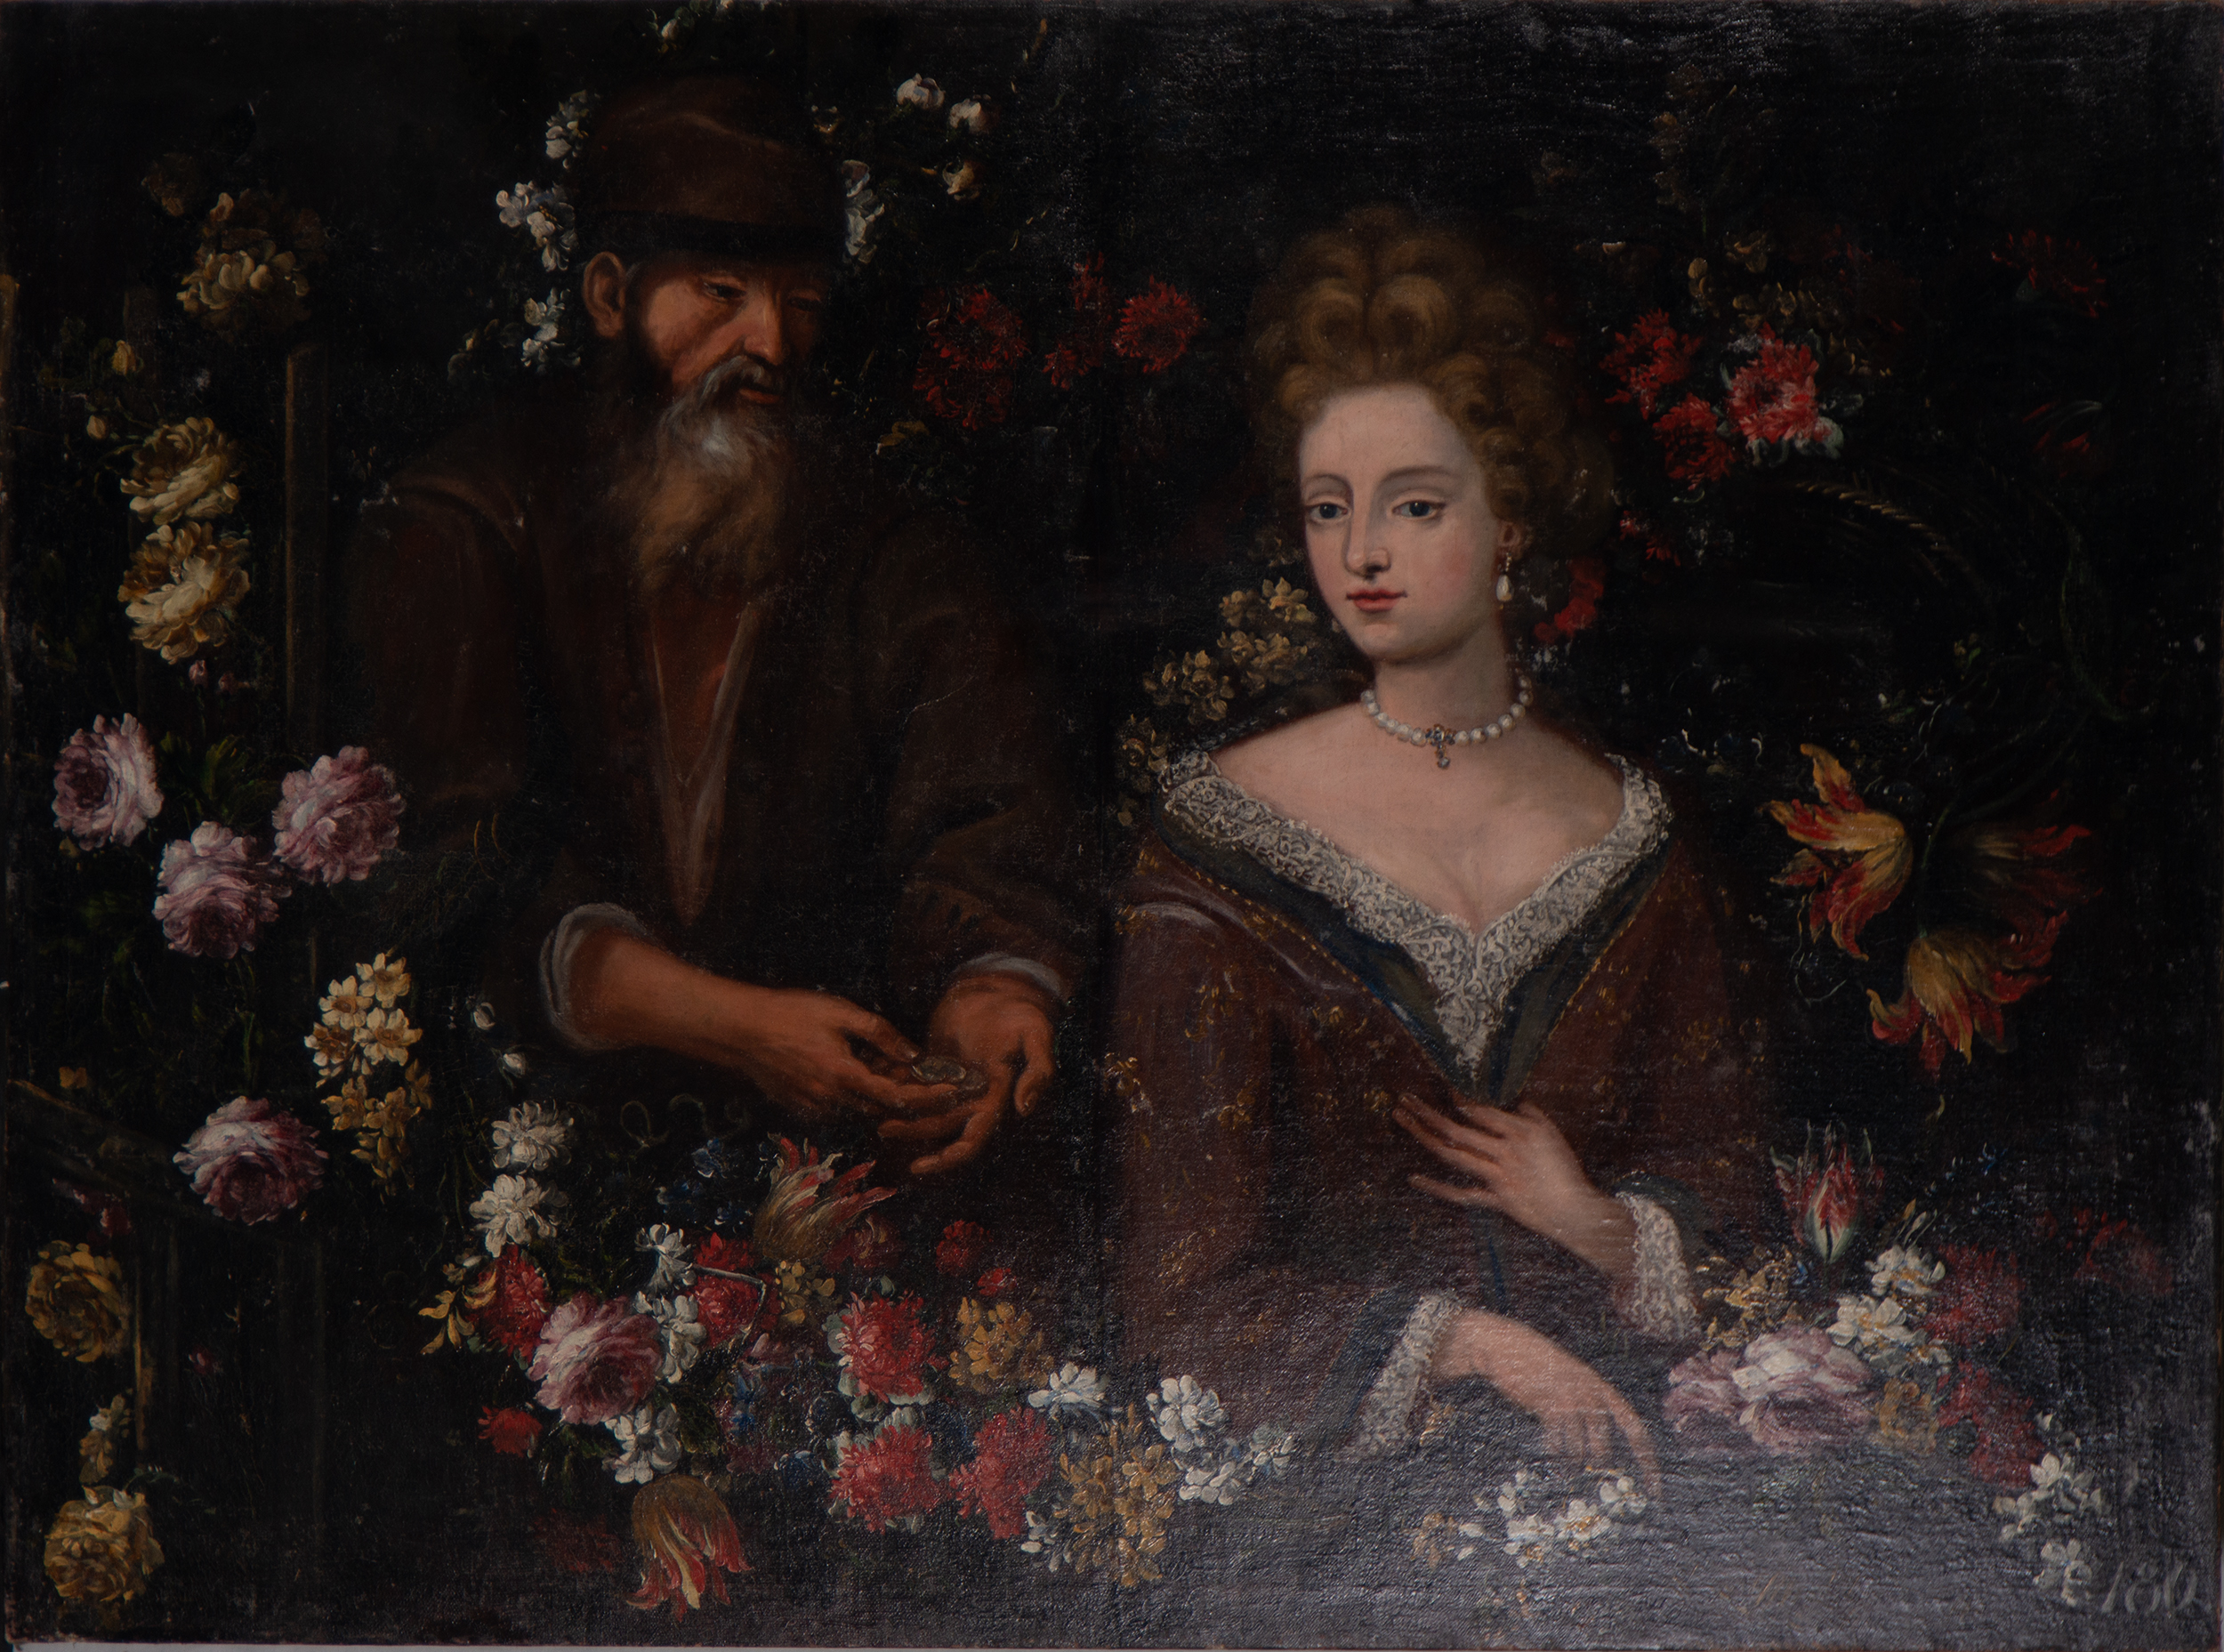 Large Flower Garland, with a lady and a beggar, Flemish school of the 17th century - Image 2 of 12